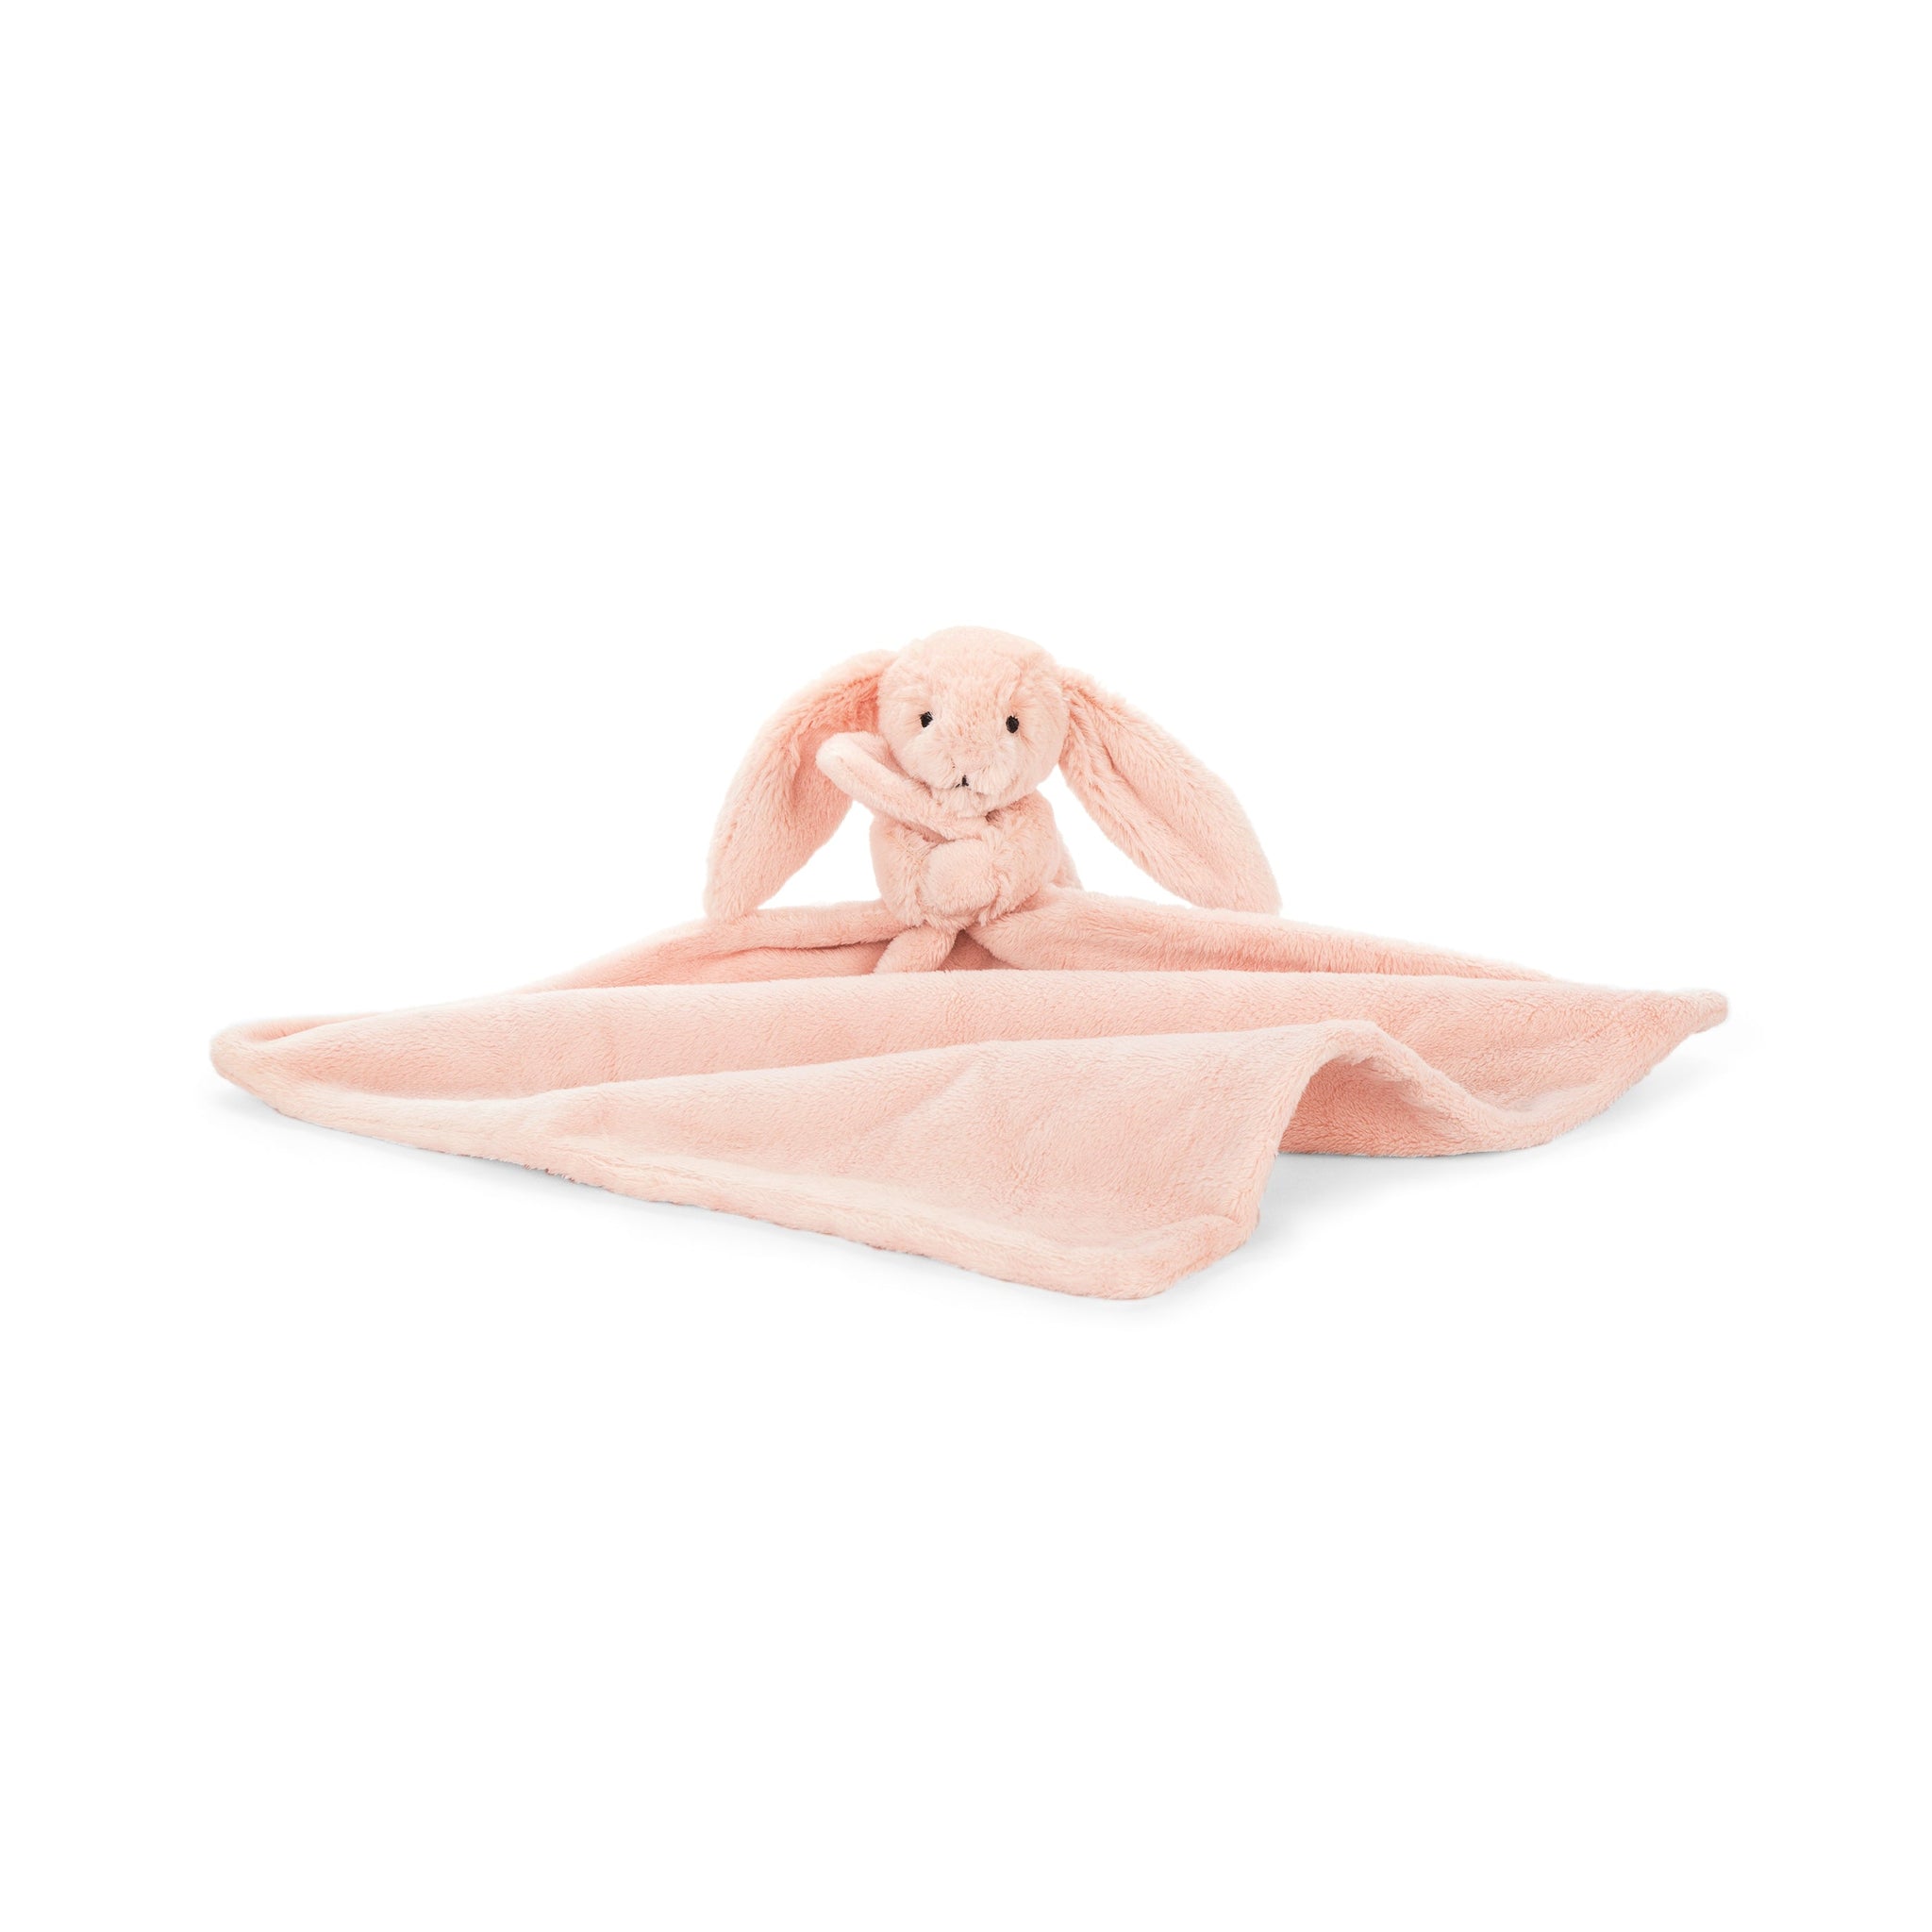 Bashful Bunny Soother - Several Colors